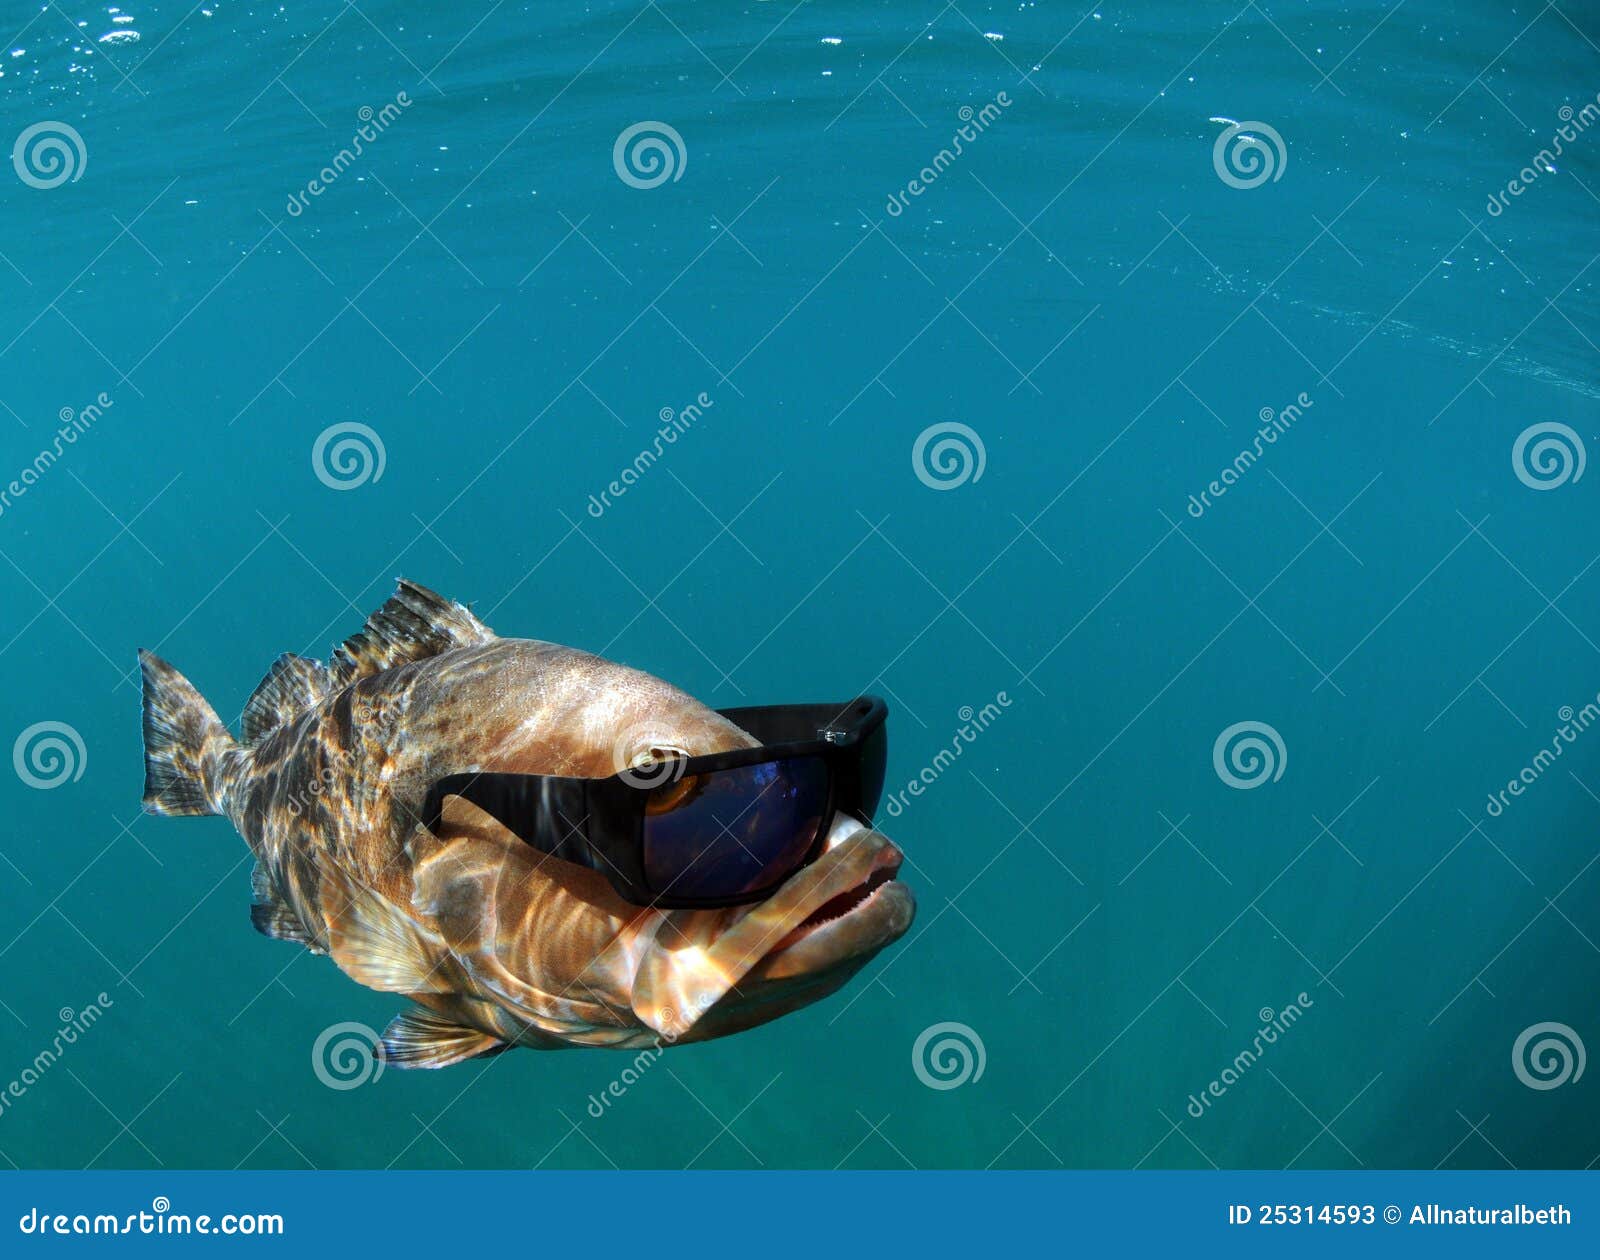 Cool Fish Wearing Sunglasses Stock Image - Image of cool, funny: 25314593